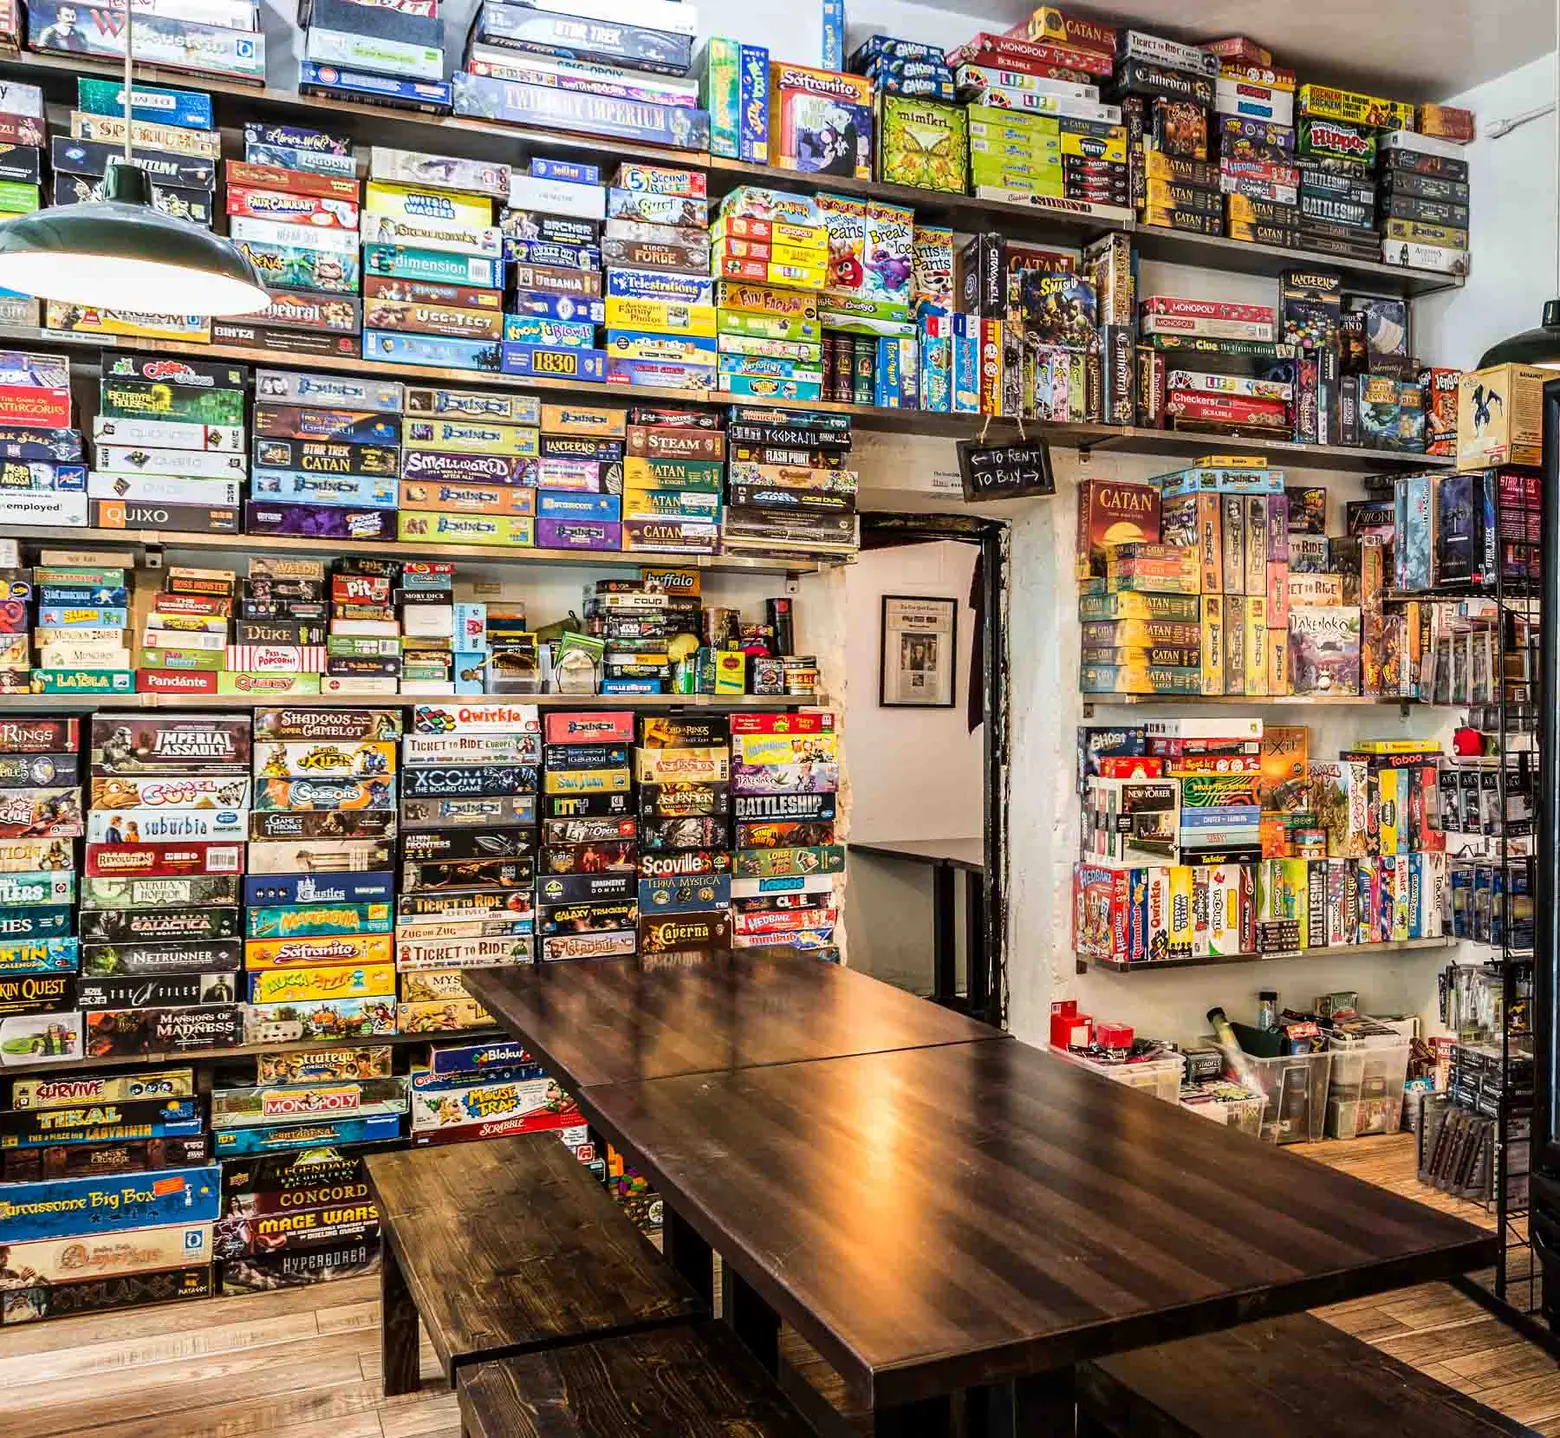 15 fun spots for games and grub in NYC